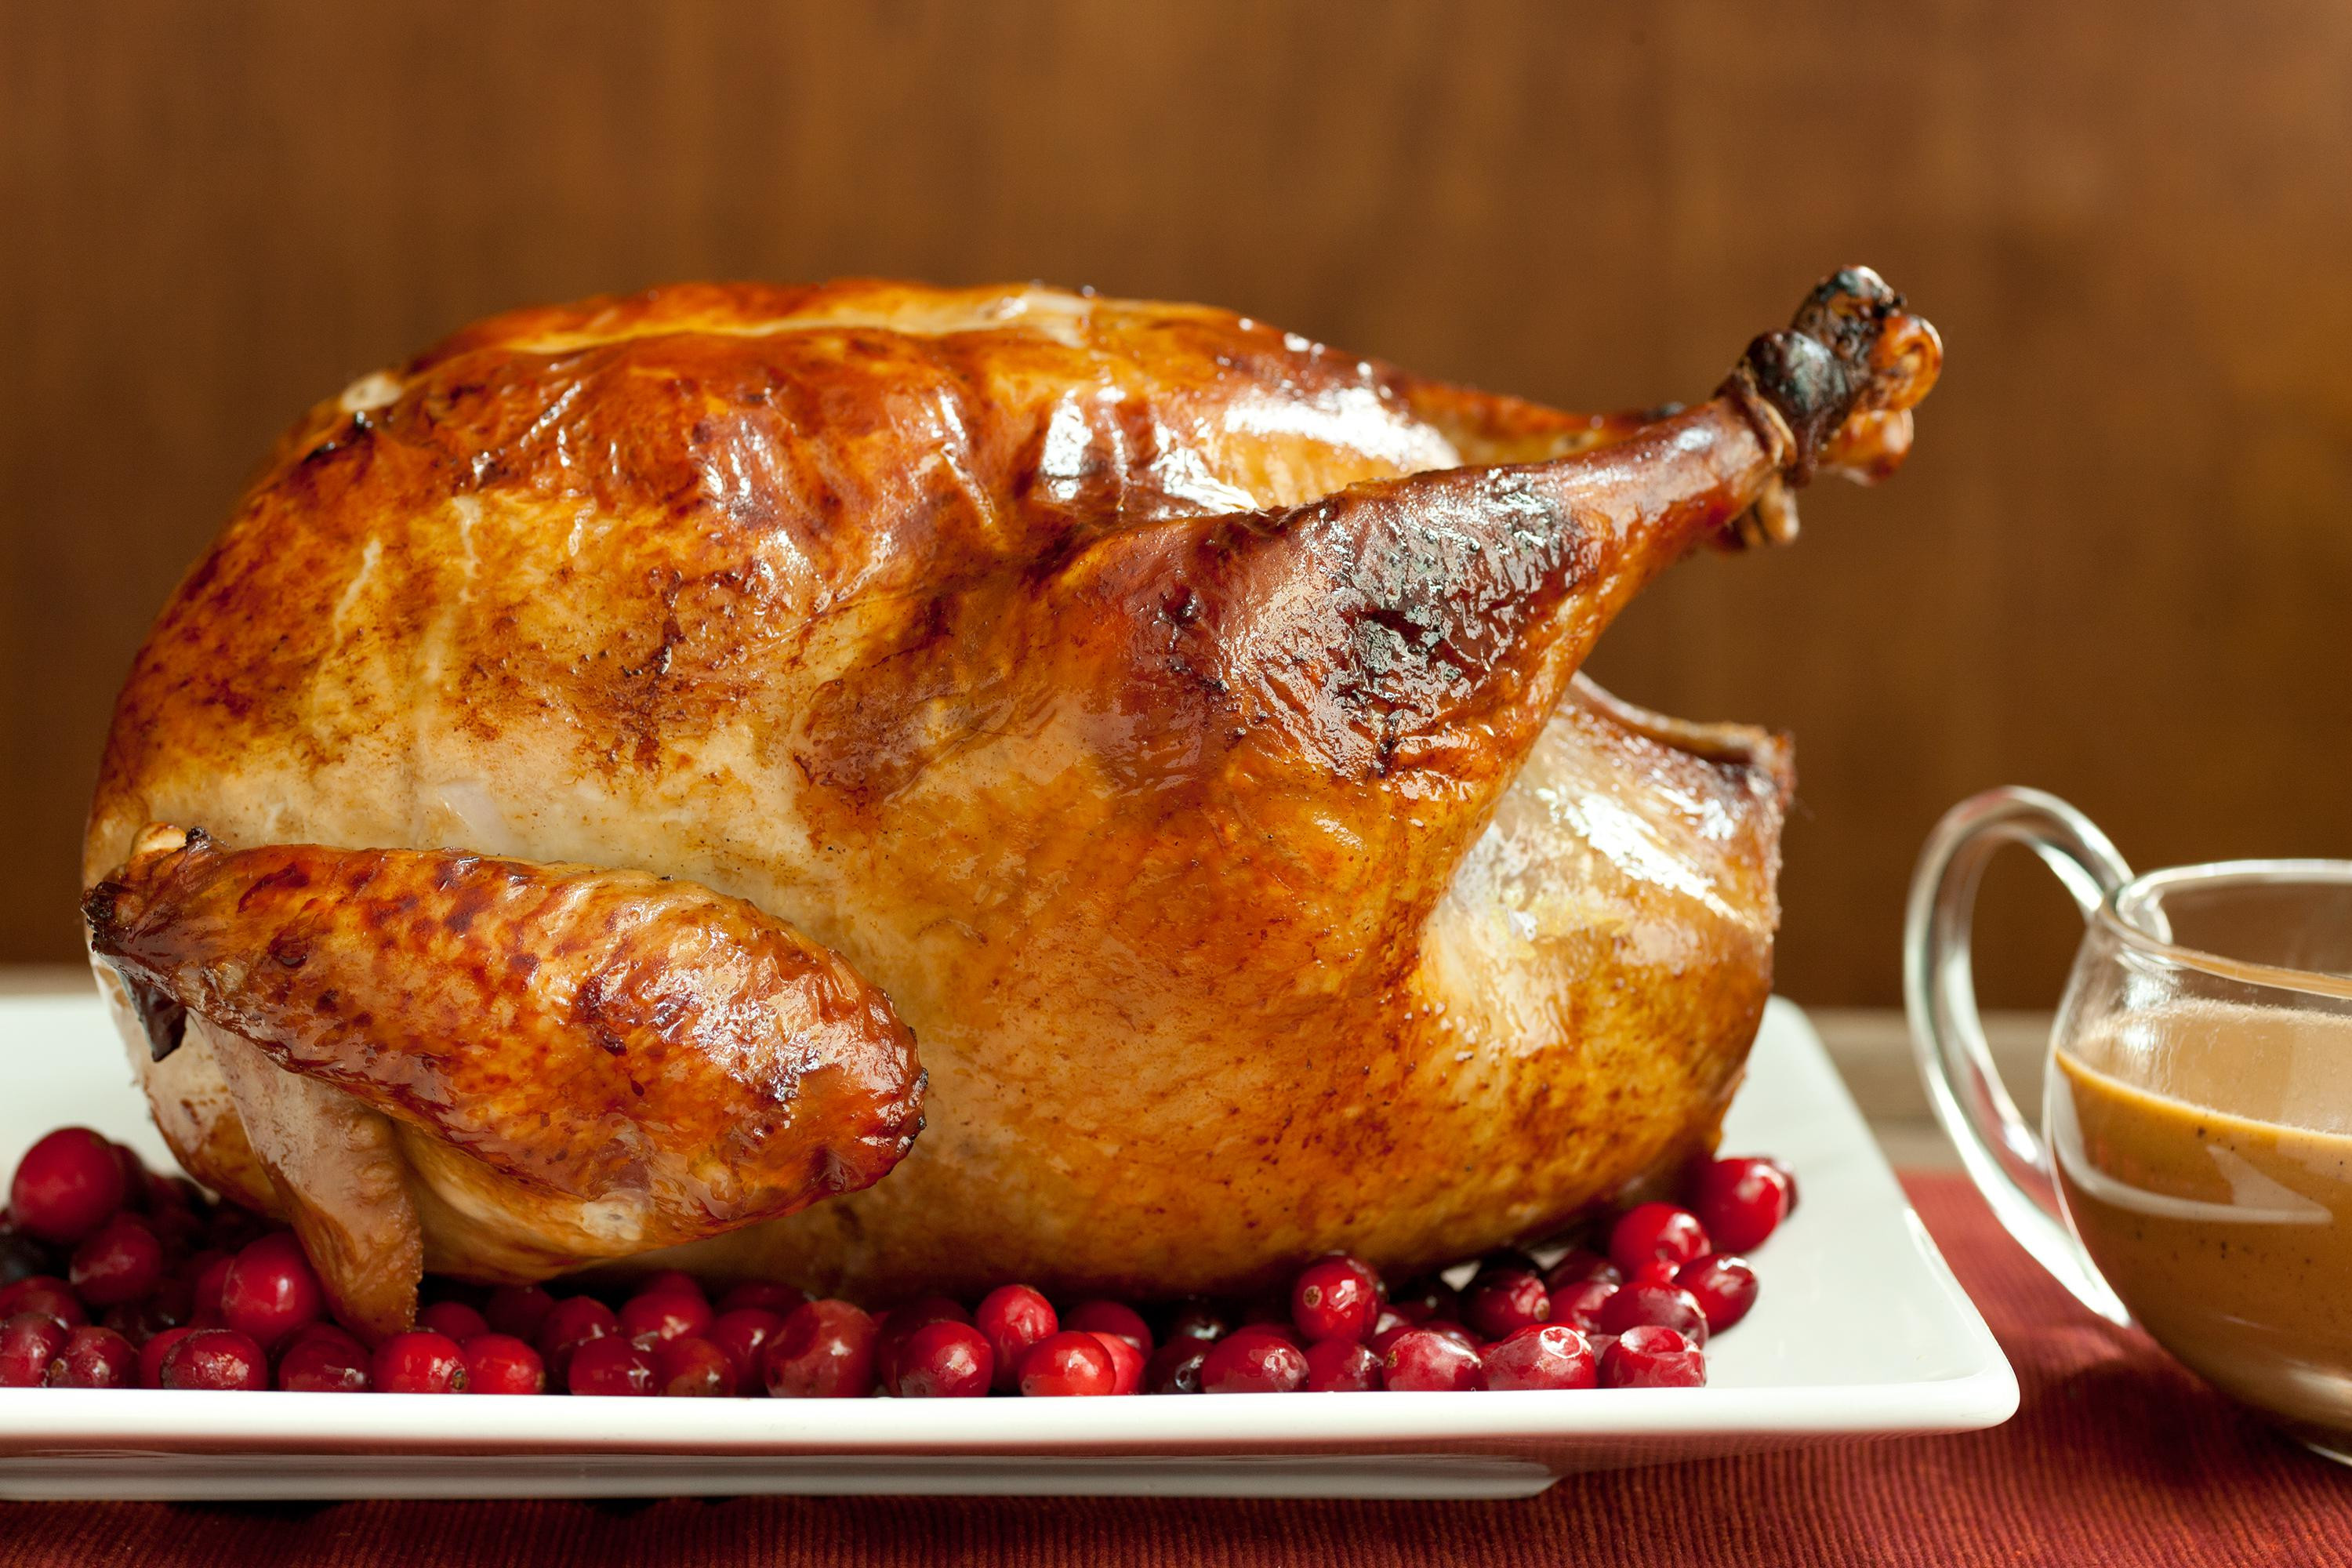 Turkey Images For Thanksgiving
 Easy Brined Roasted Turkey with Creamed Gravy Recipe